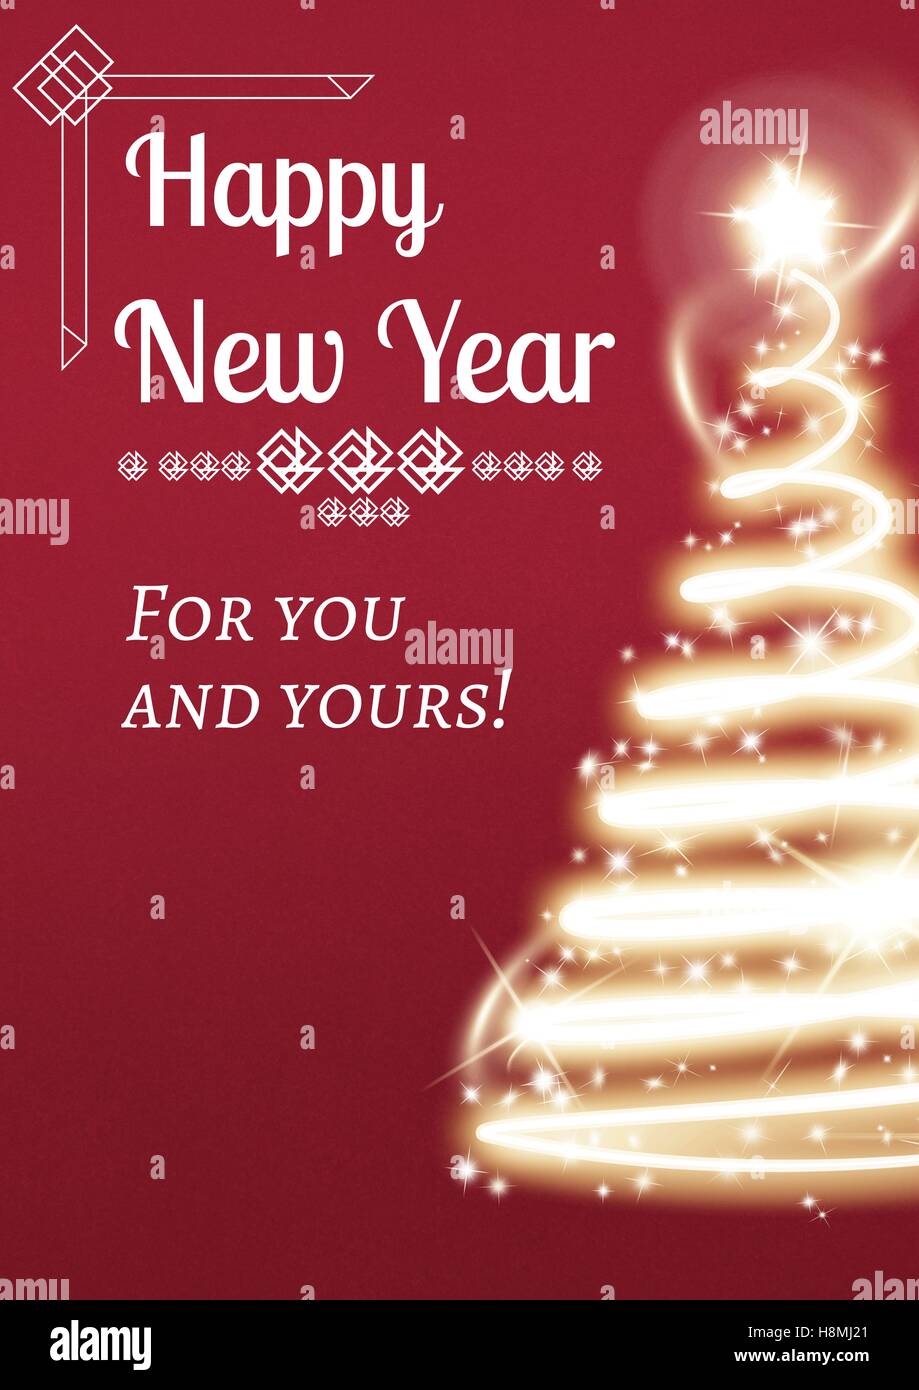 New Year Message on Light Christmas Tree Background Design Stock Photo